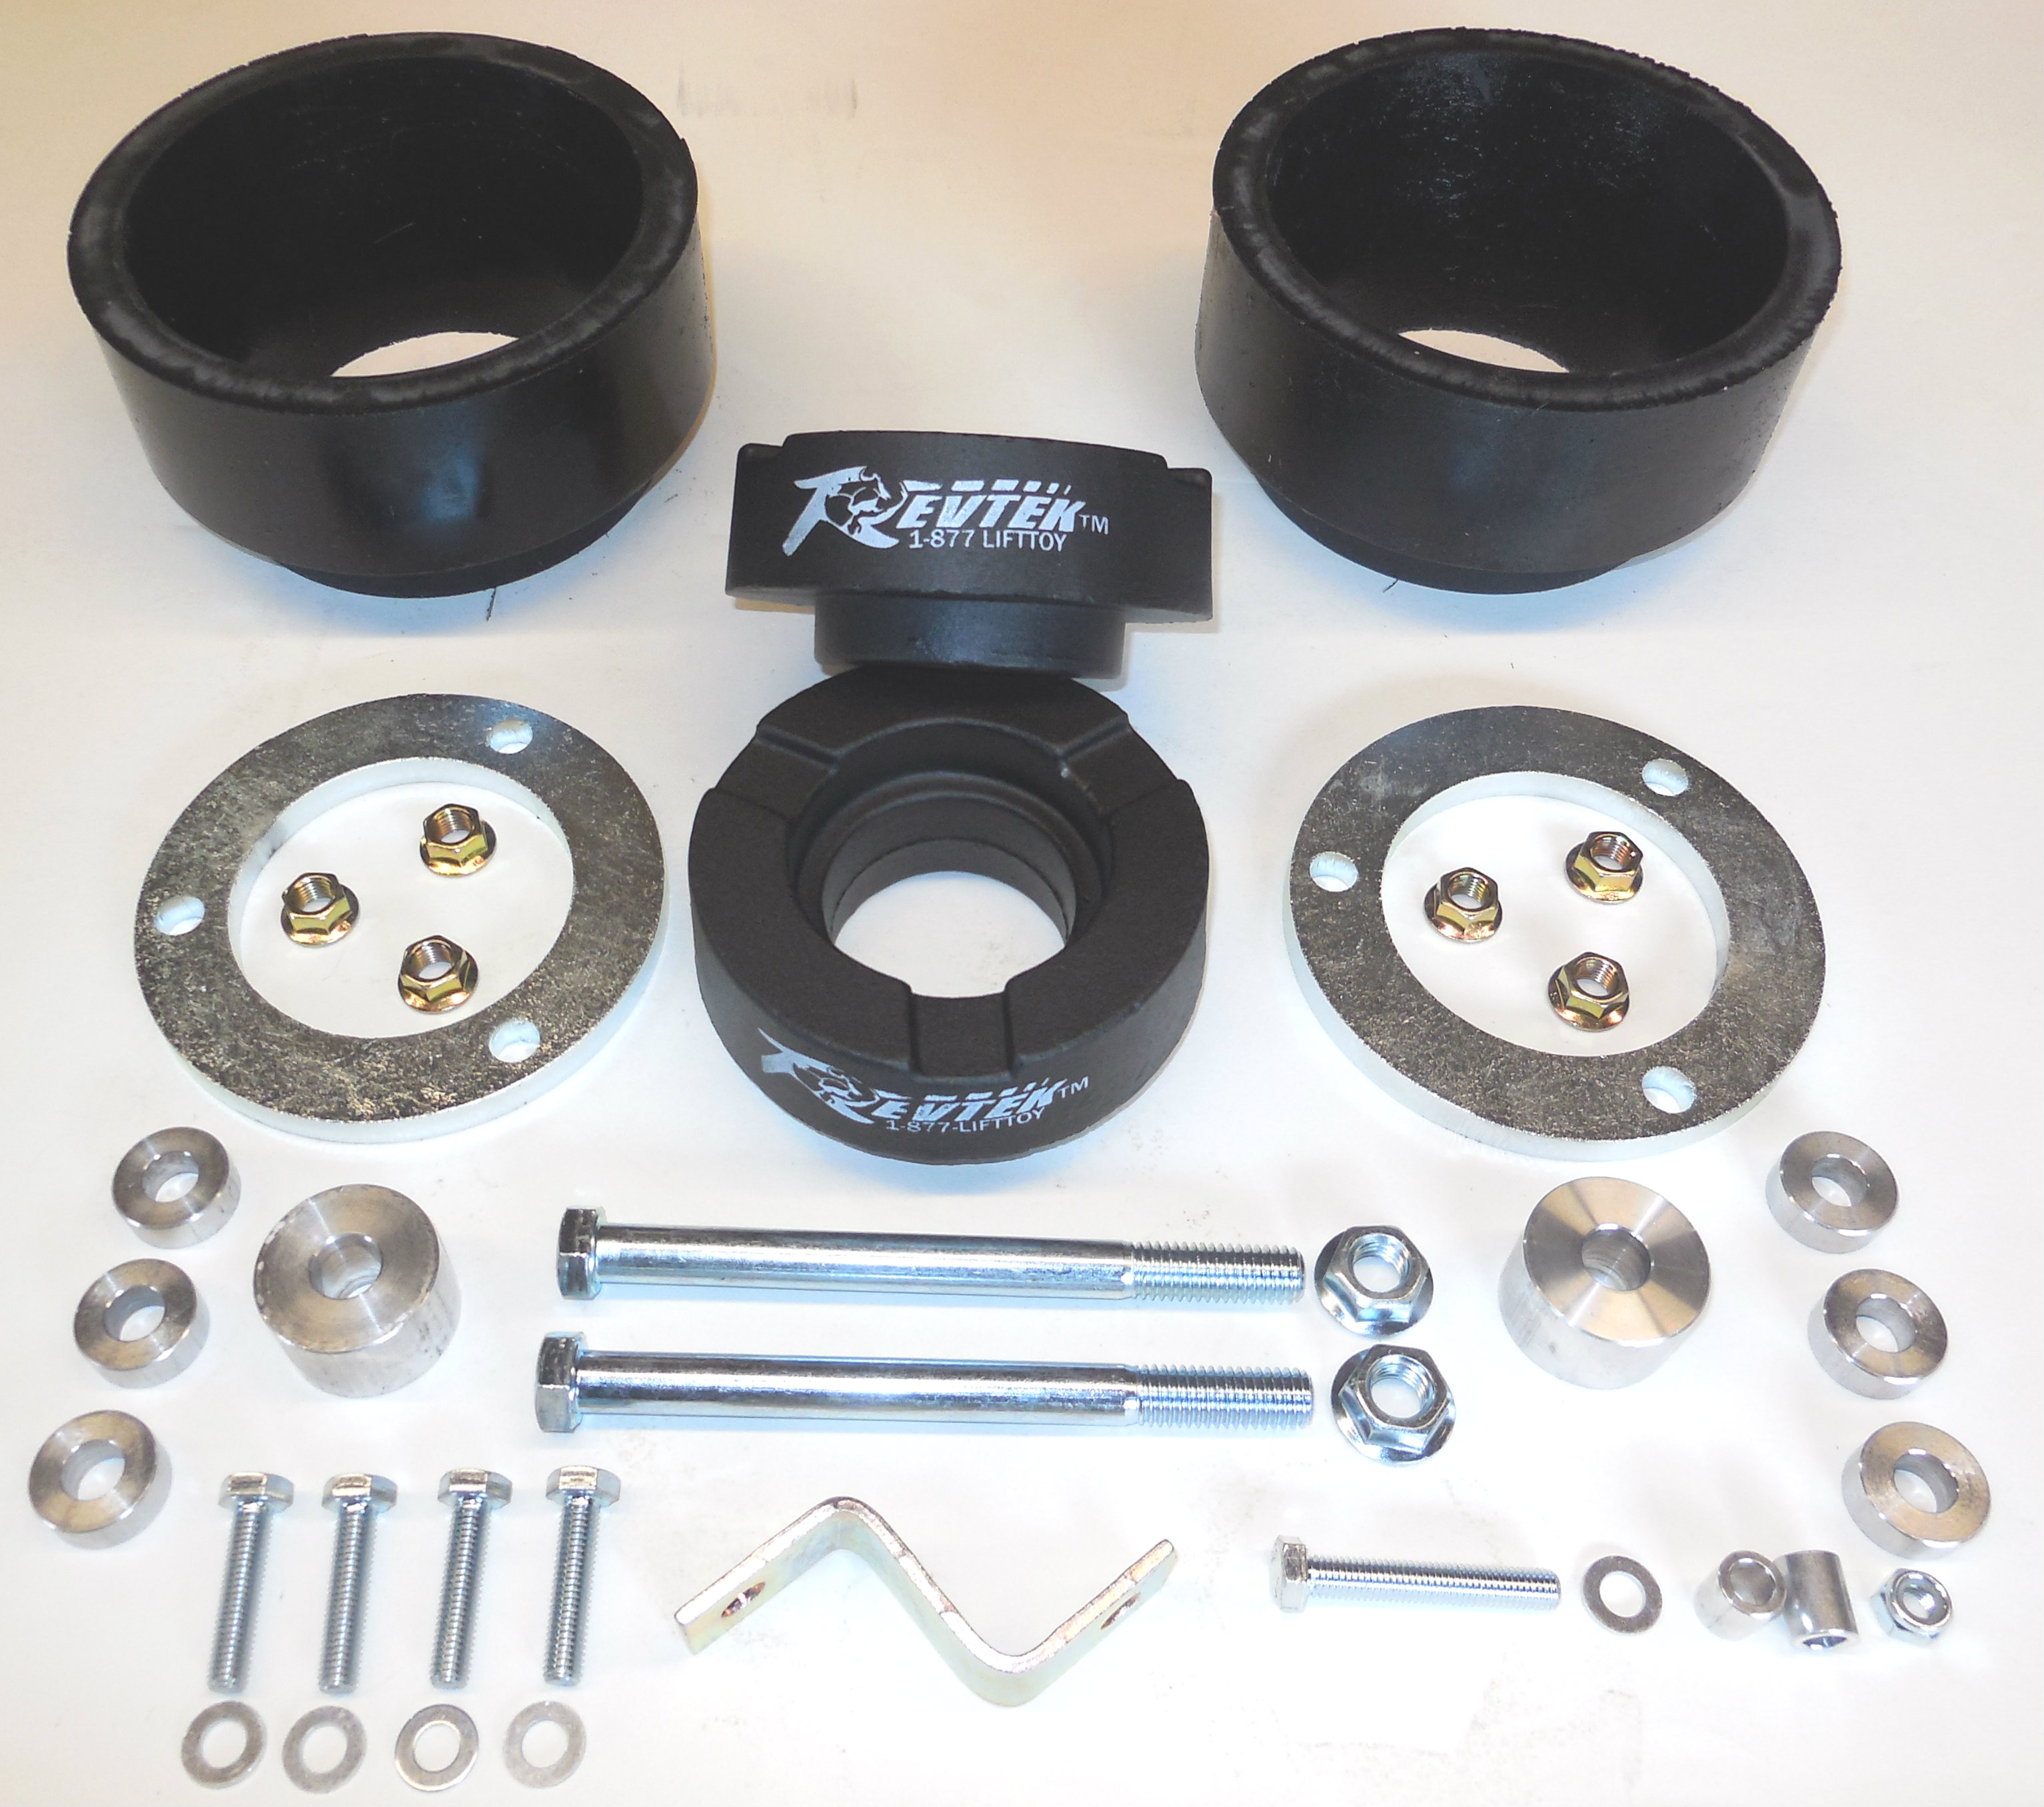 Revtek Kit 432N - 3 inch Front and 2 inch Rear Lift with no Shocks